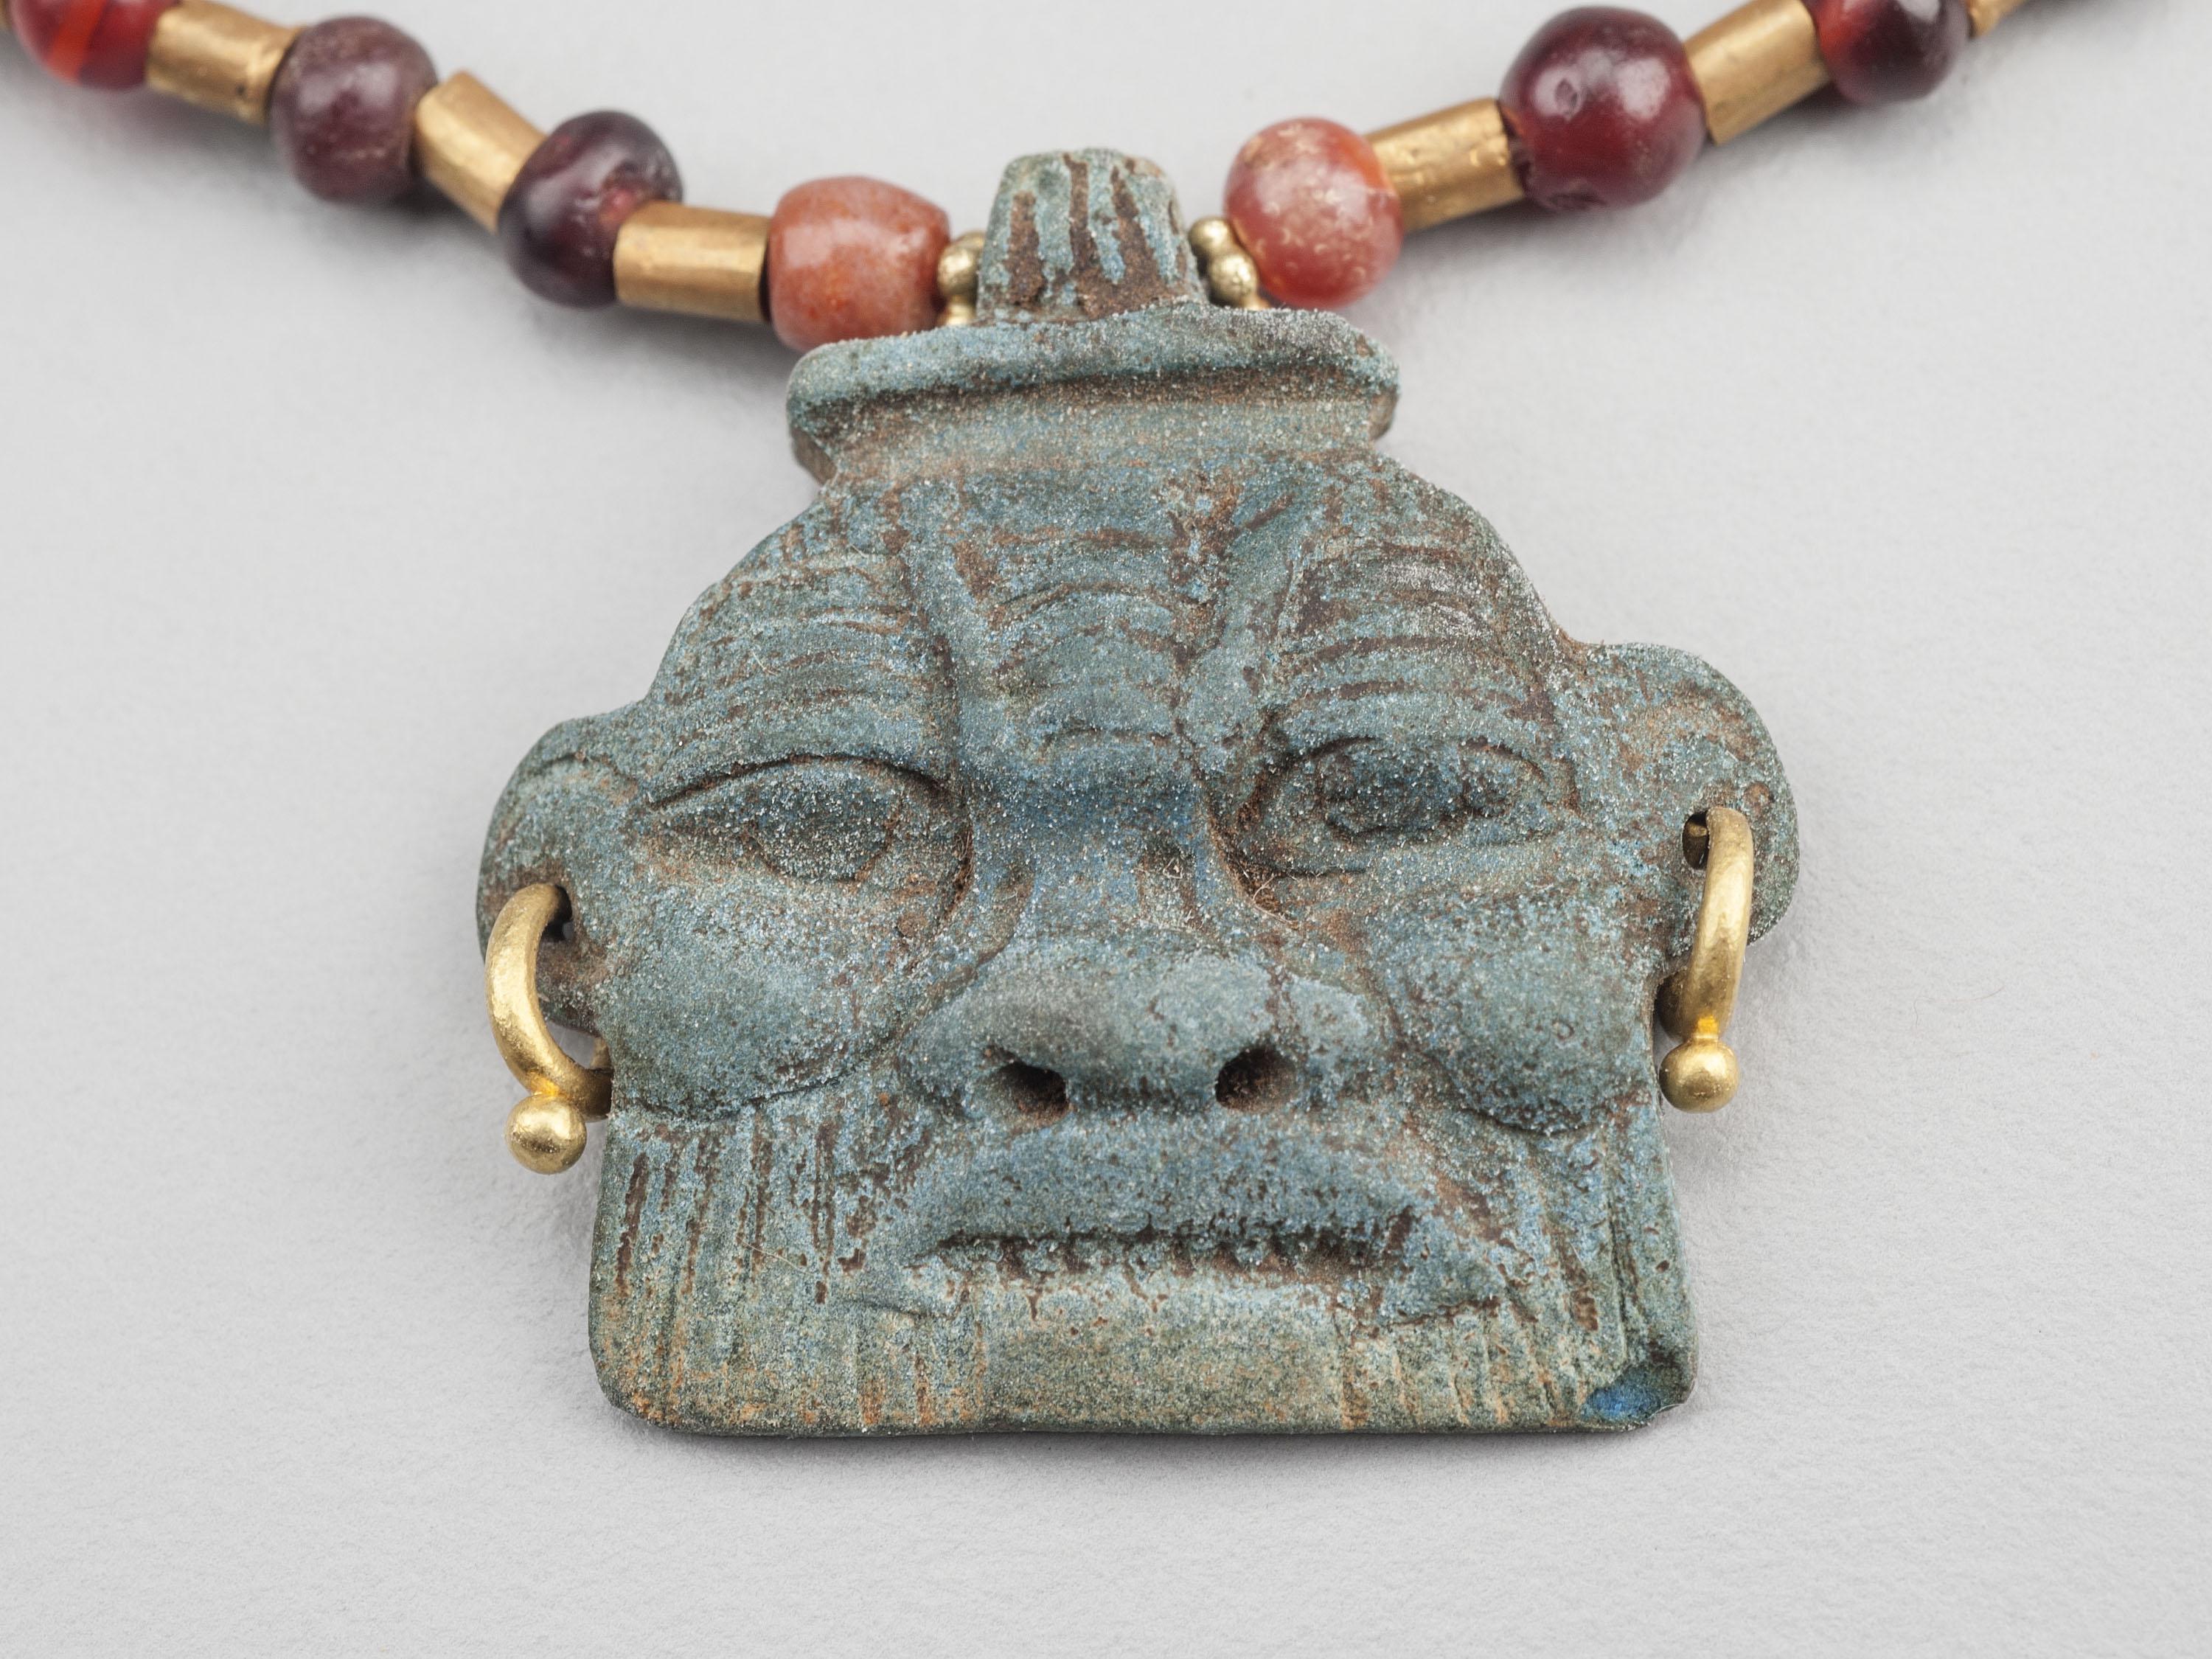 Fifty four garnet beads alternating with fifty eight 20k gold tube beads with two carnelian bi cone barrel beads midway back on each side of the necklace; a faience pendant depicting the ancient Egyptian deity Bes hangs from the center of the